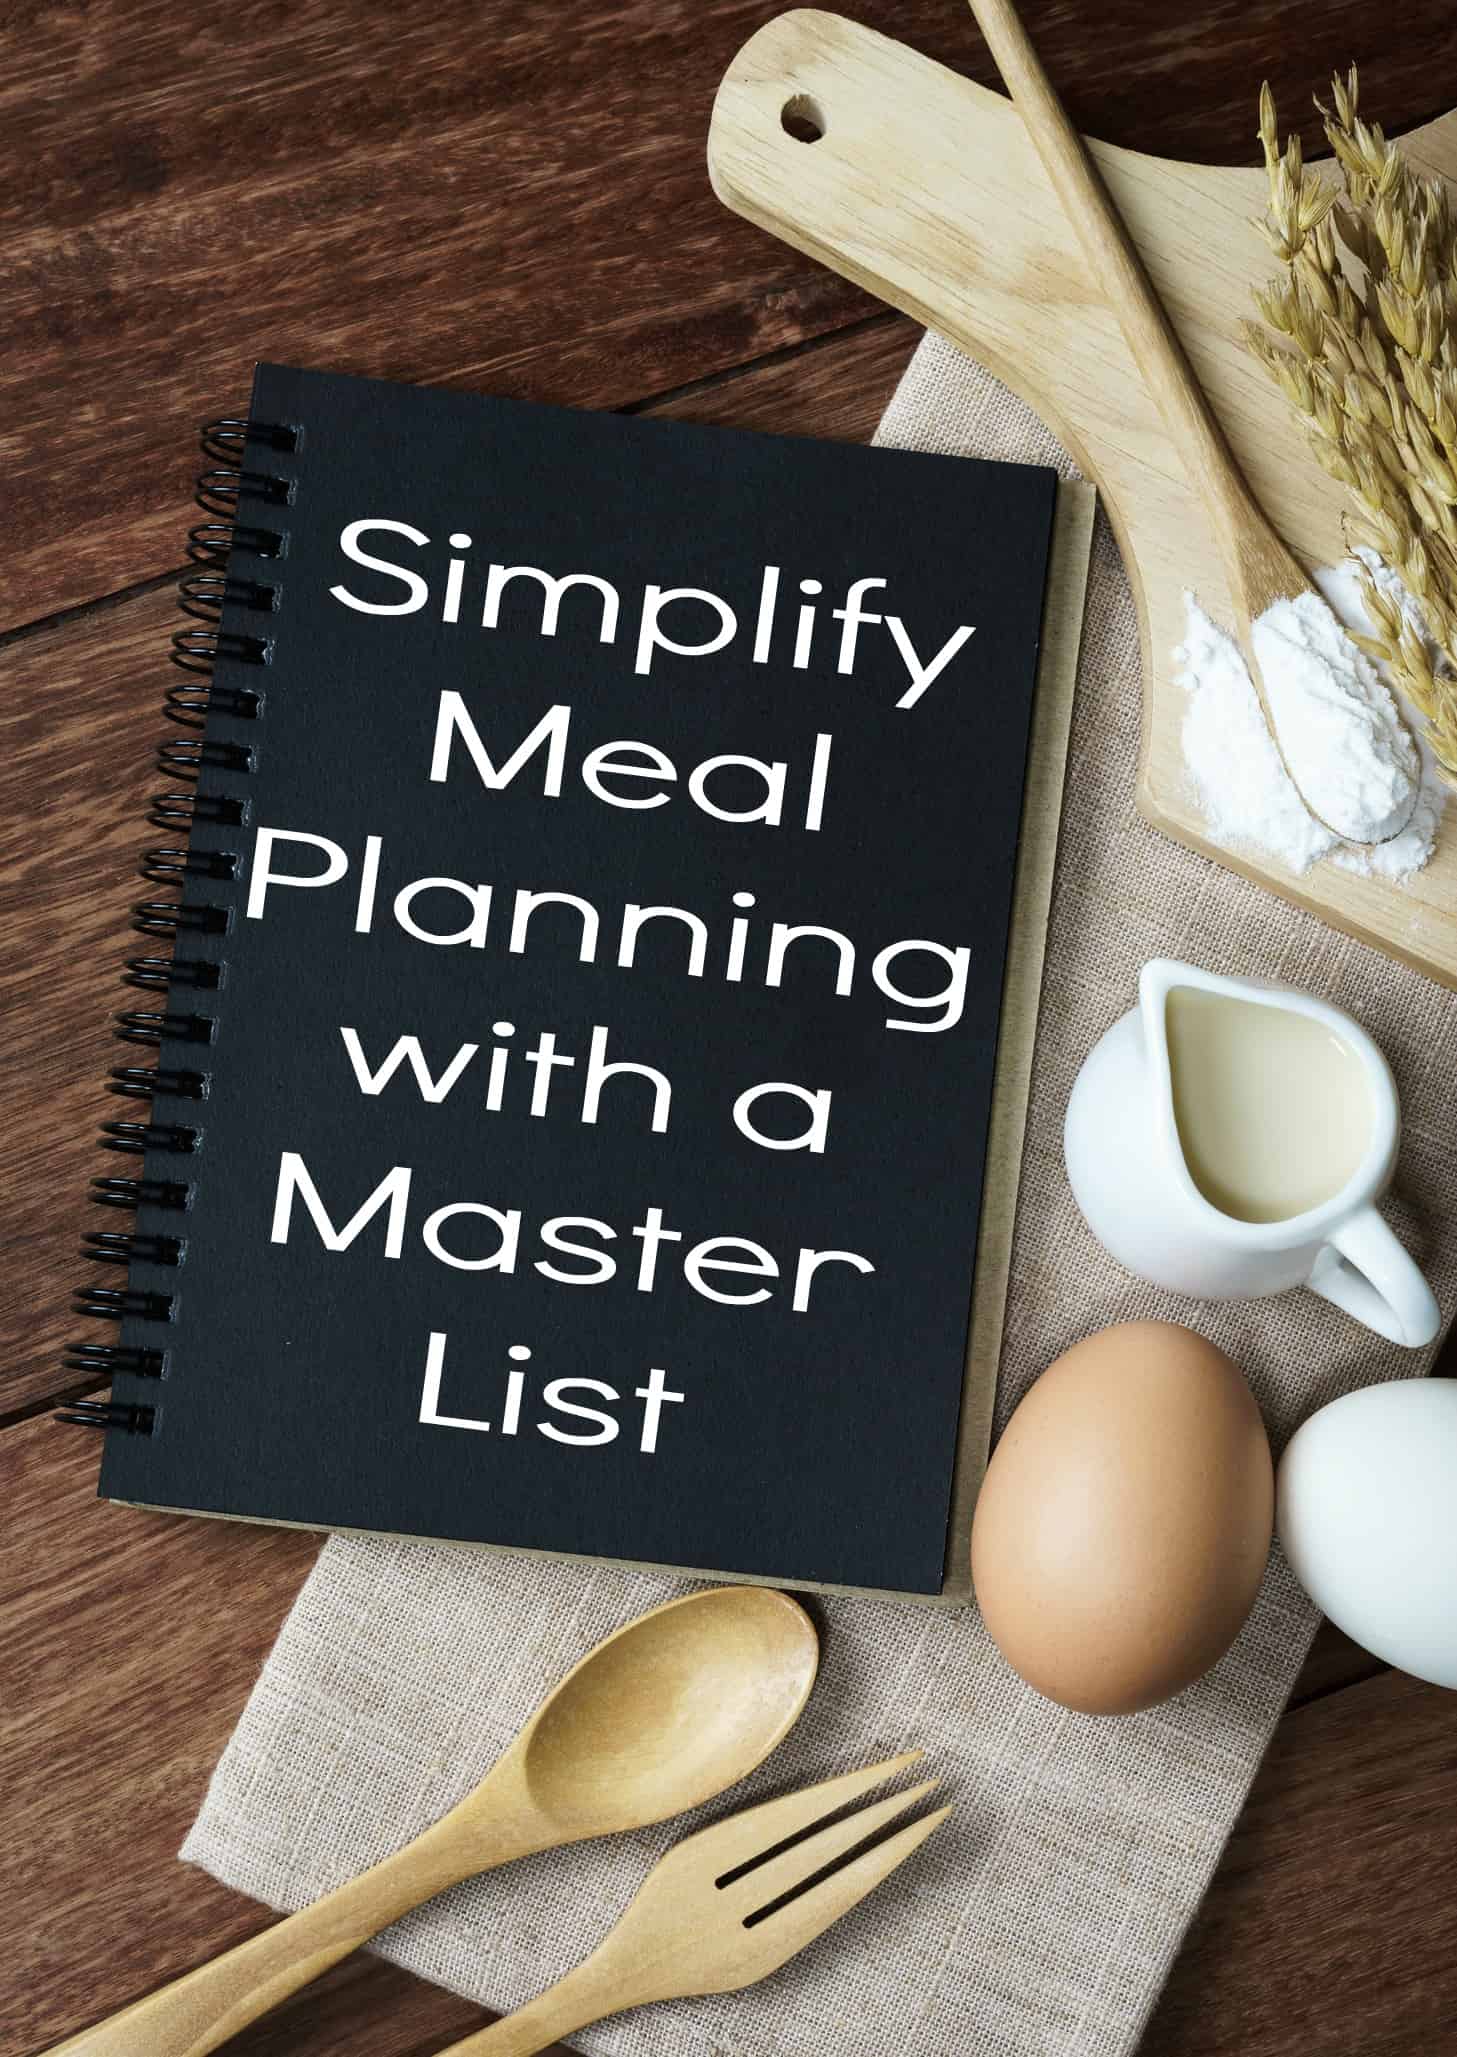 Simplify meal planning with a master list